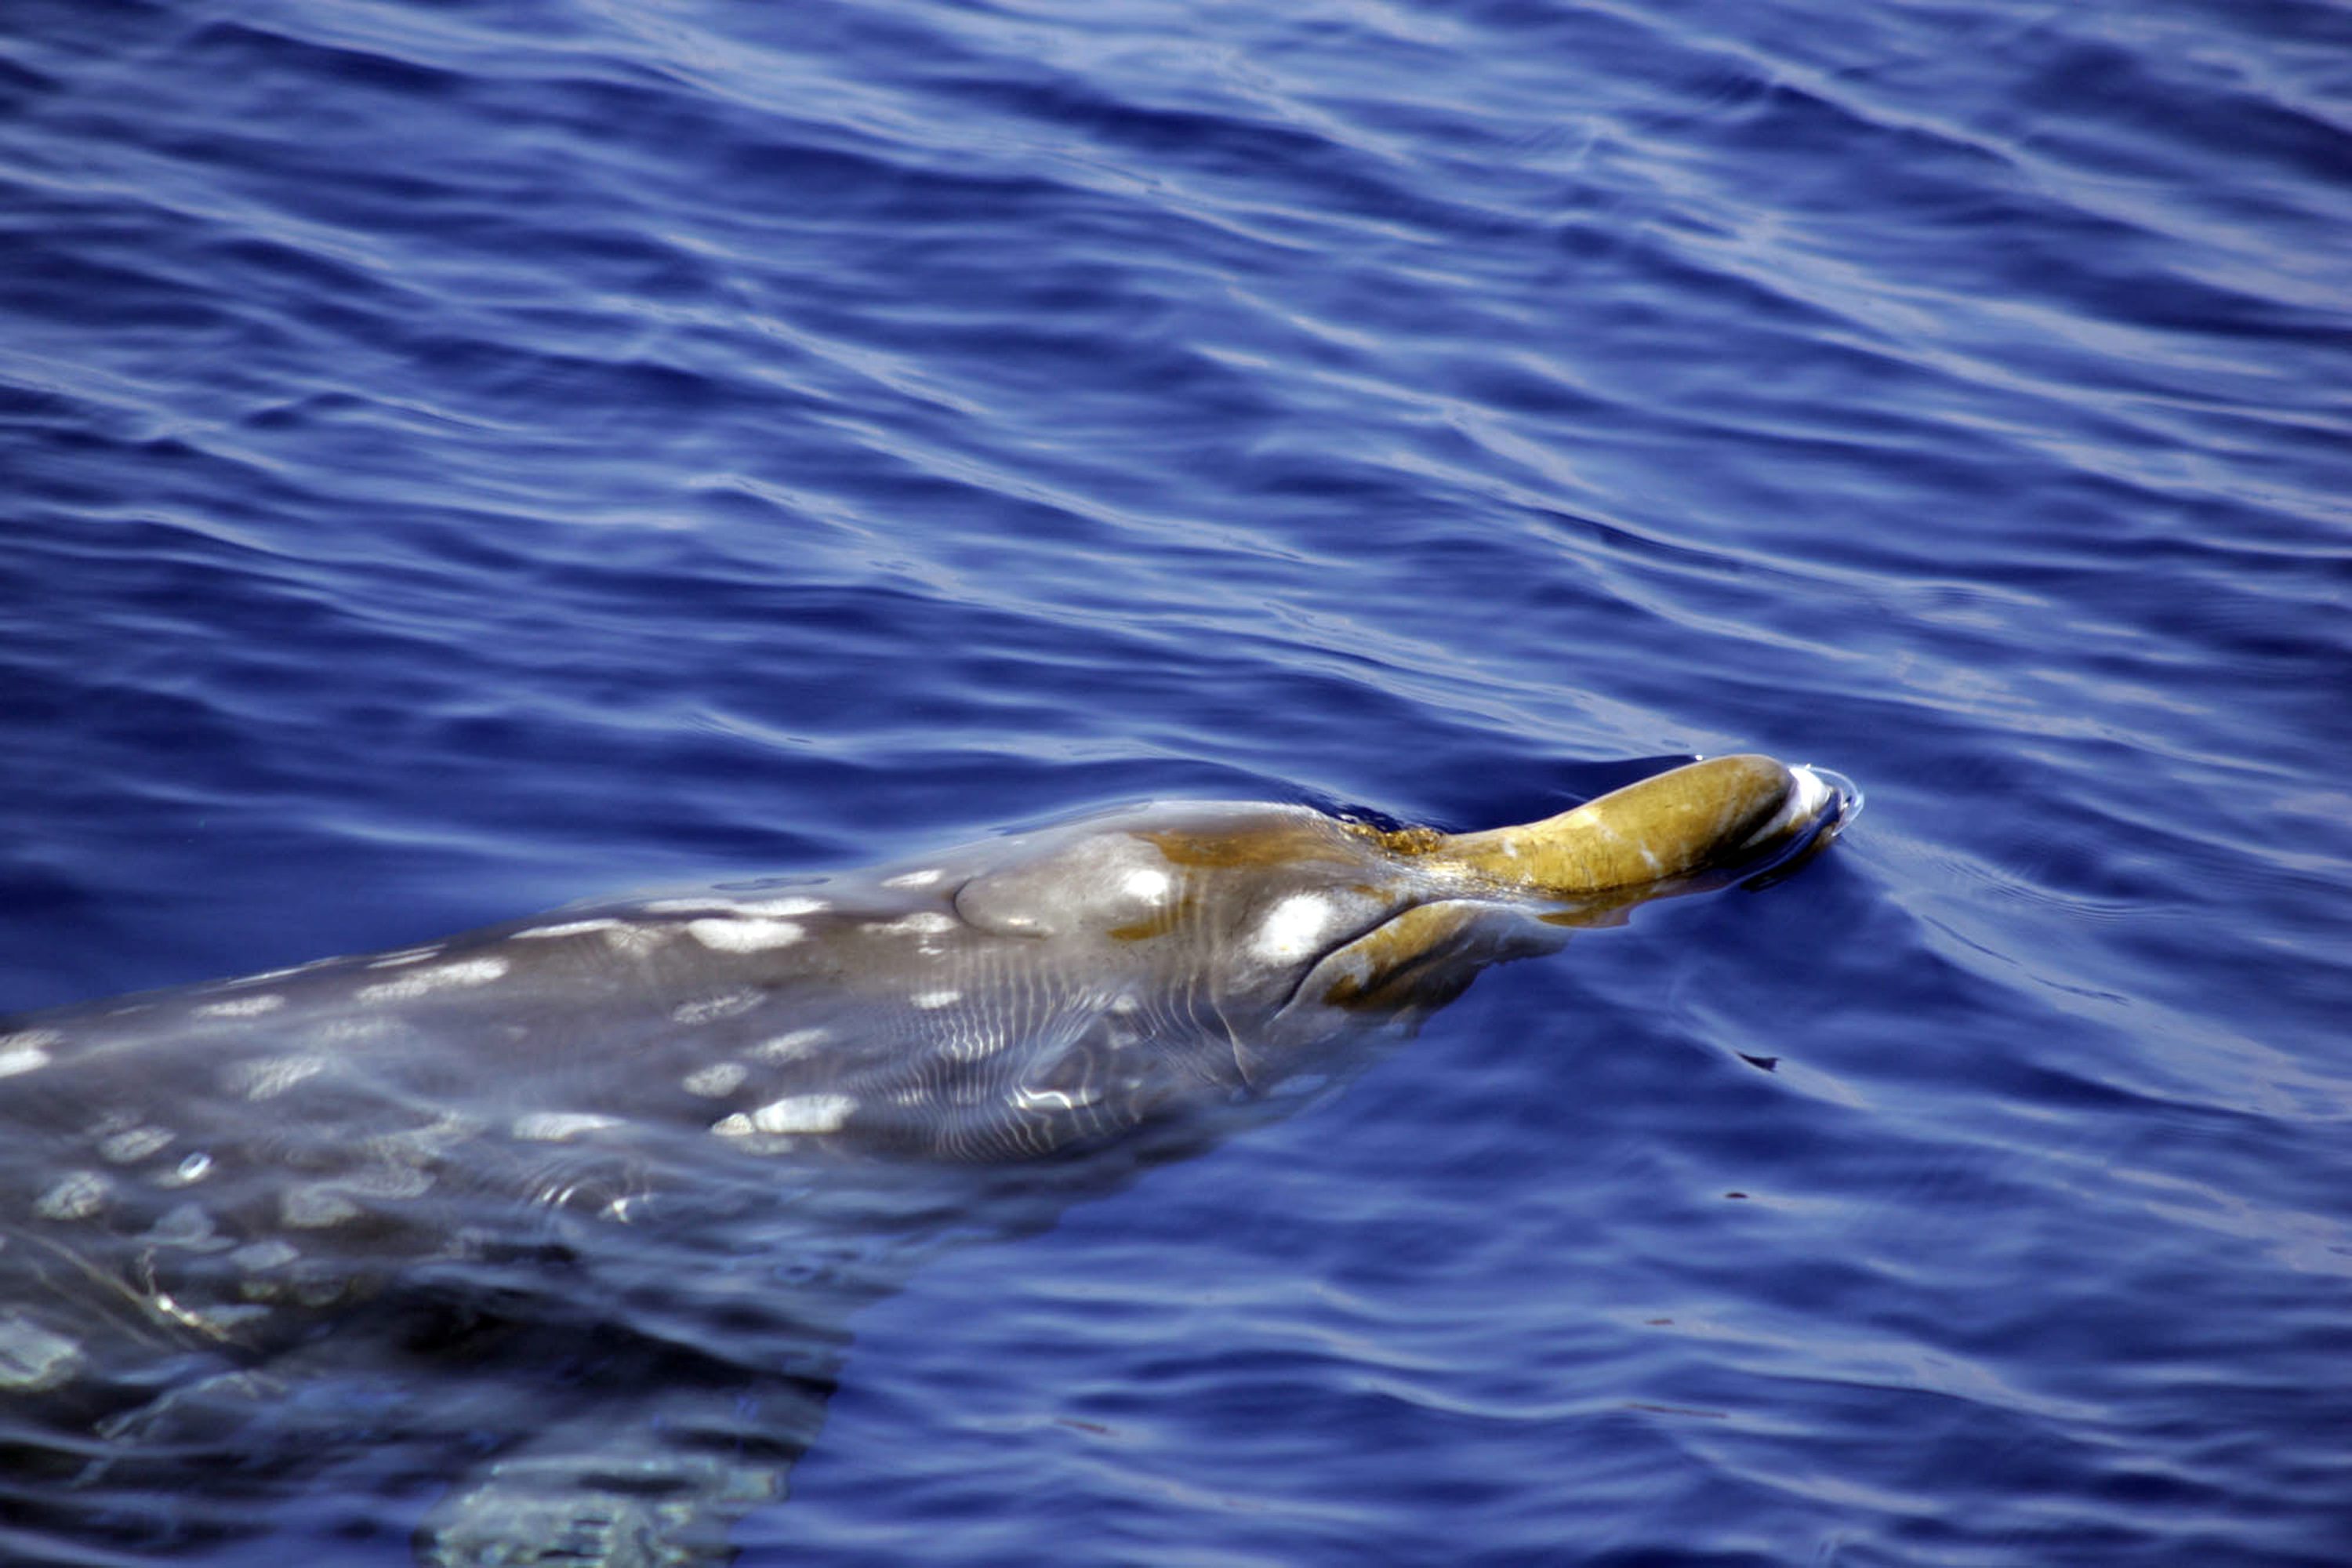 A beaked whale. Beaked whales’ tendency for deep dives makes their presence in the shallow waters of the Bering Strait Region and Valdez unusual. ( Robin W. Baird / Cascadia Research Collective / AP)